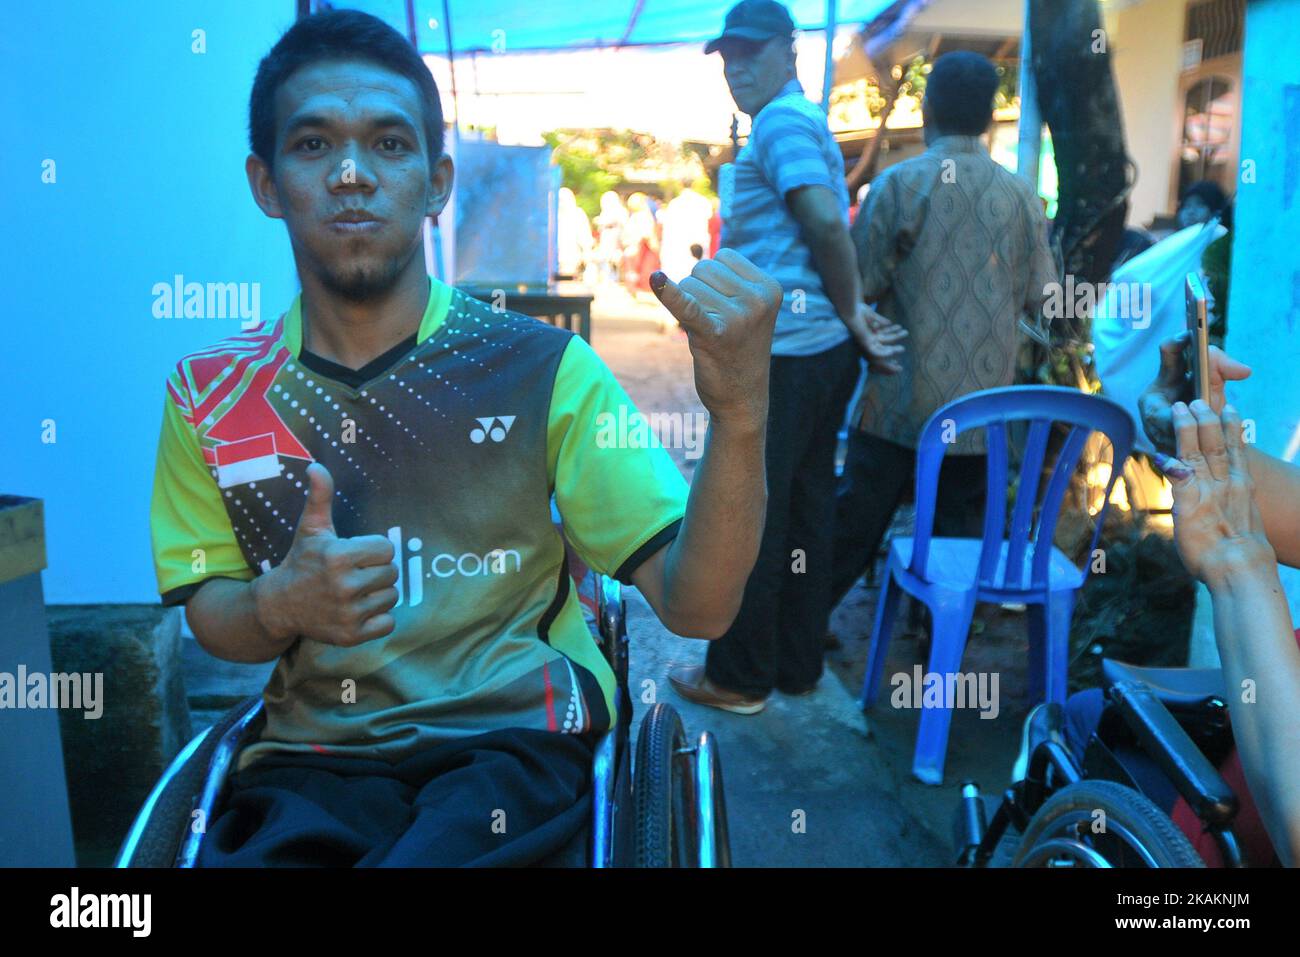 Persons disabilities to the voter booth during the implementation of Jakarta Election ballot in place of voting 43, Pondok Bambu Jakarta on February 15, 2017. The enthusiasm with Disabilities voted (nyoblos). Officers KPPS help guide to determine their voting rights during the implementation of the Jakarta Election ballot this Election Day simultaneously conducted throughout Indonesia to choose the leader of the Regions. Dasril Roszandi (Photo by Dasril Roszandi/NurPhoto) *** Please Use Credit from Credit Field *** Stock Photo